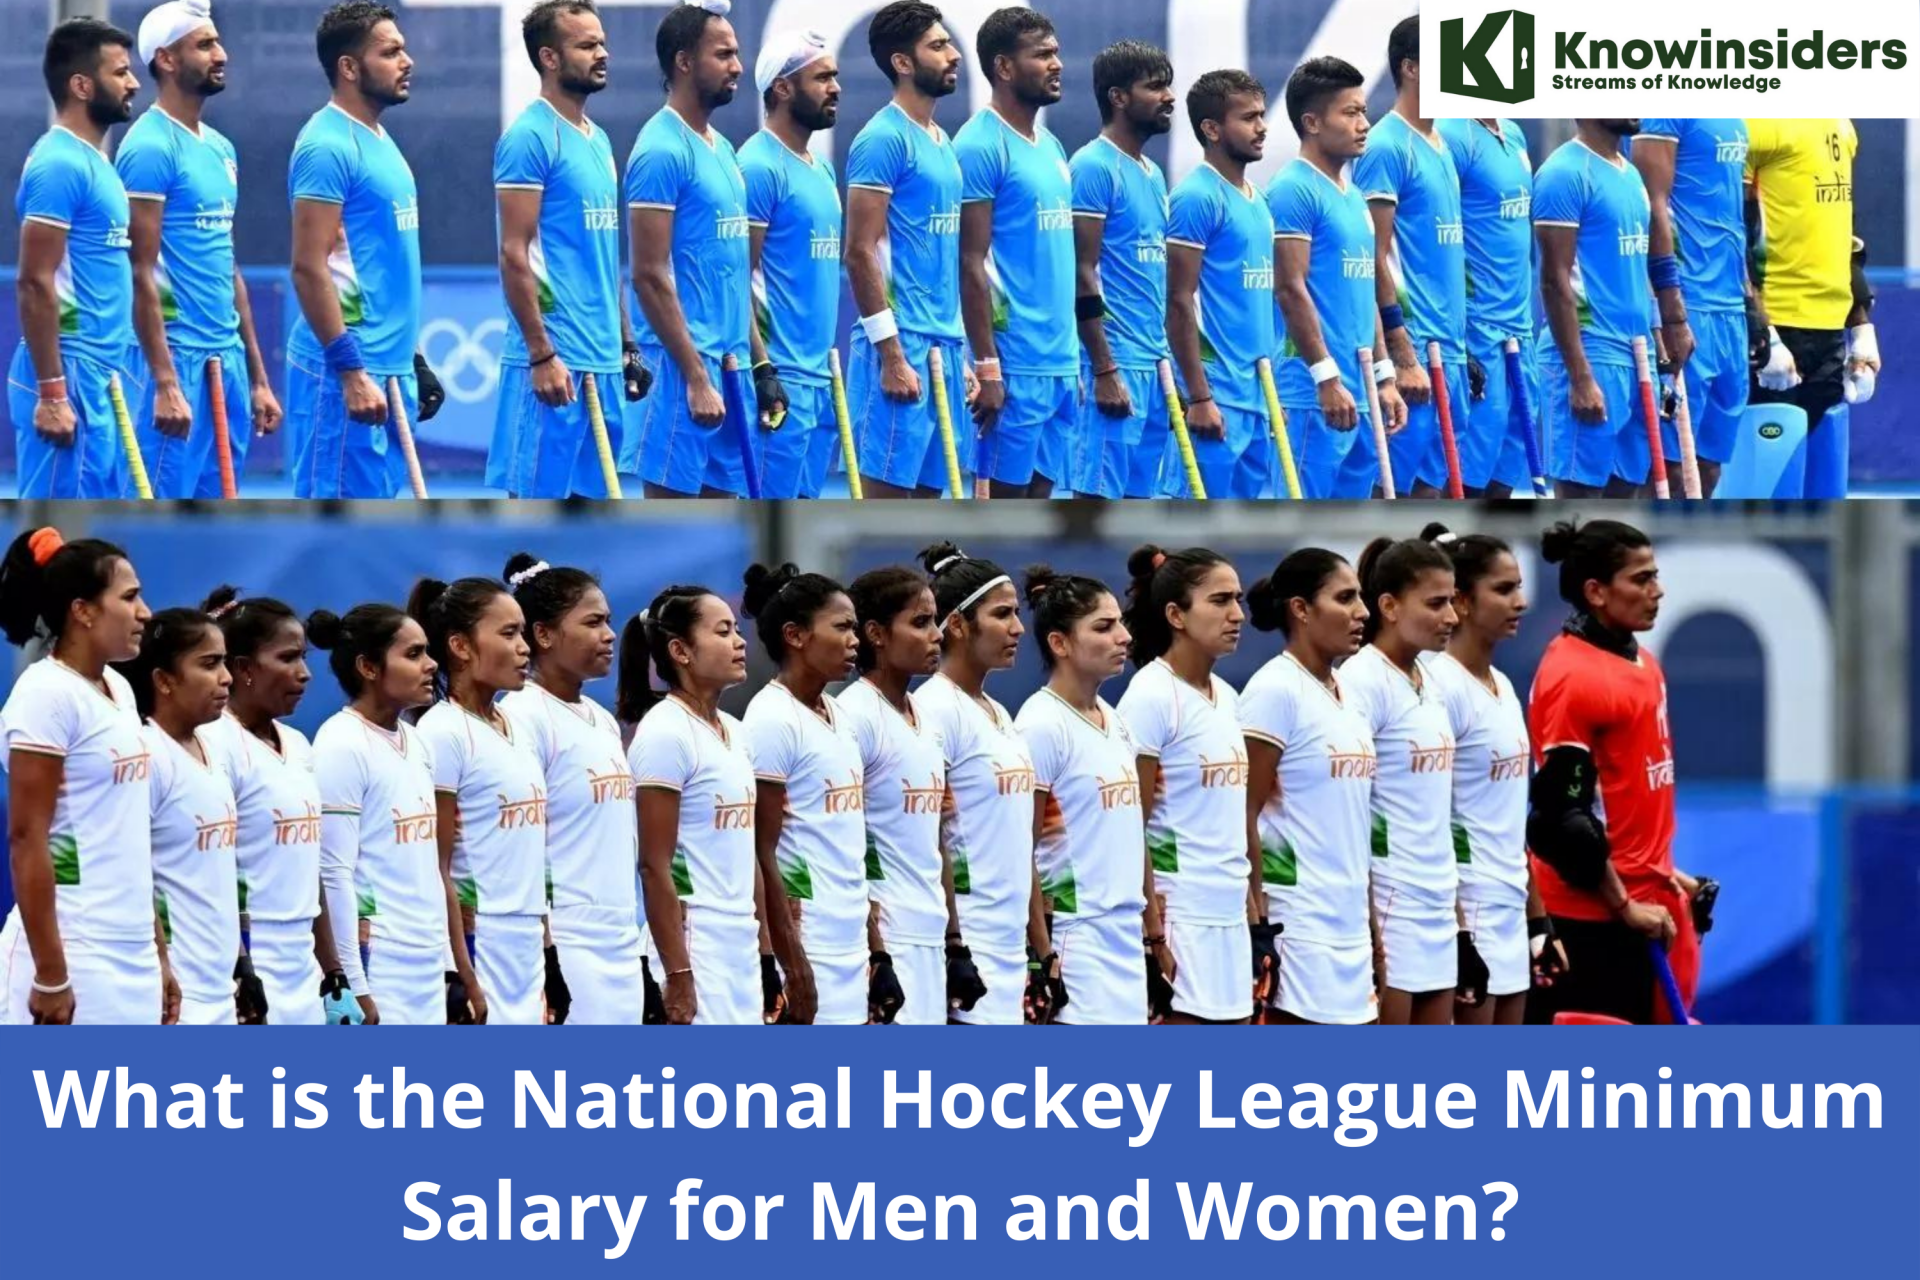 What is the National Hockey League Minimum Salary for Men and Women?